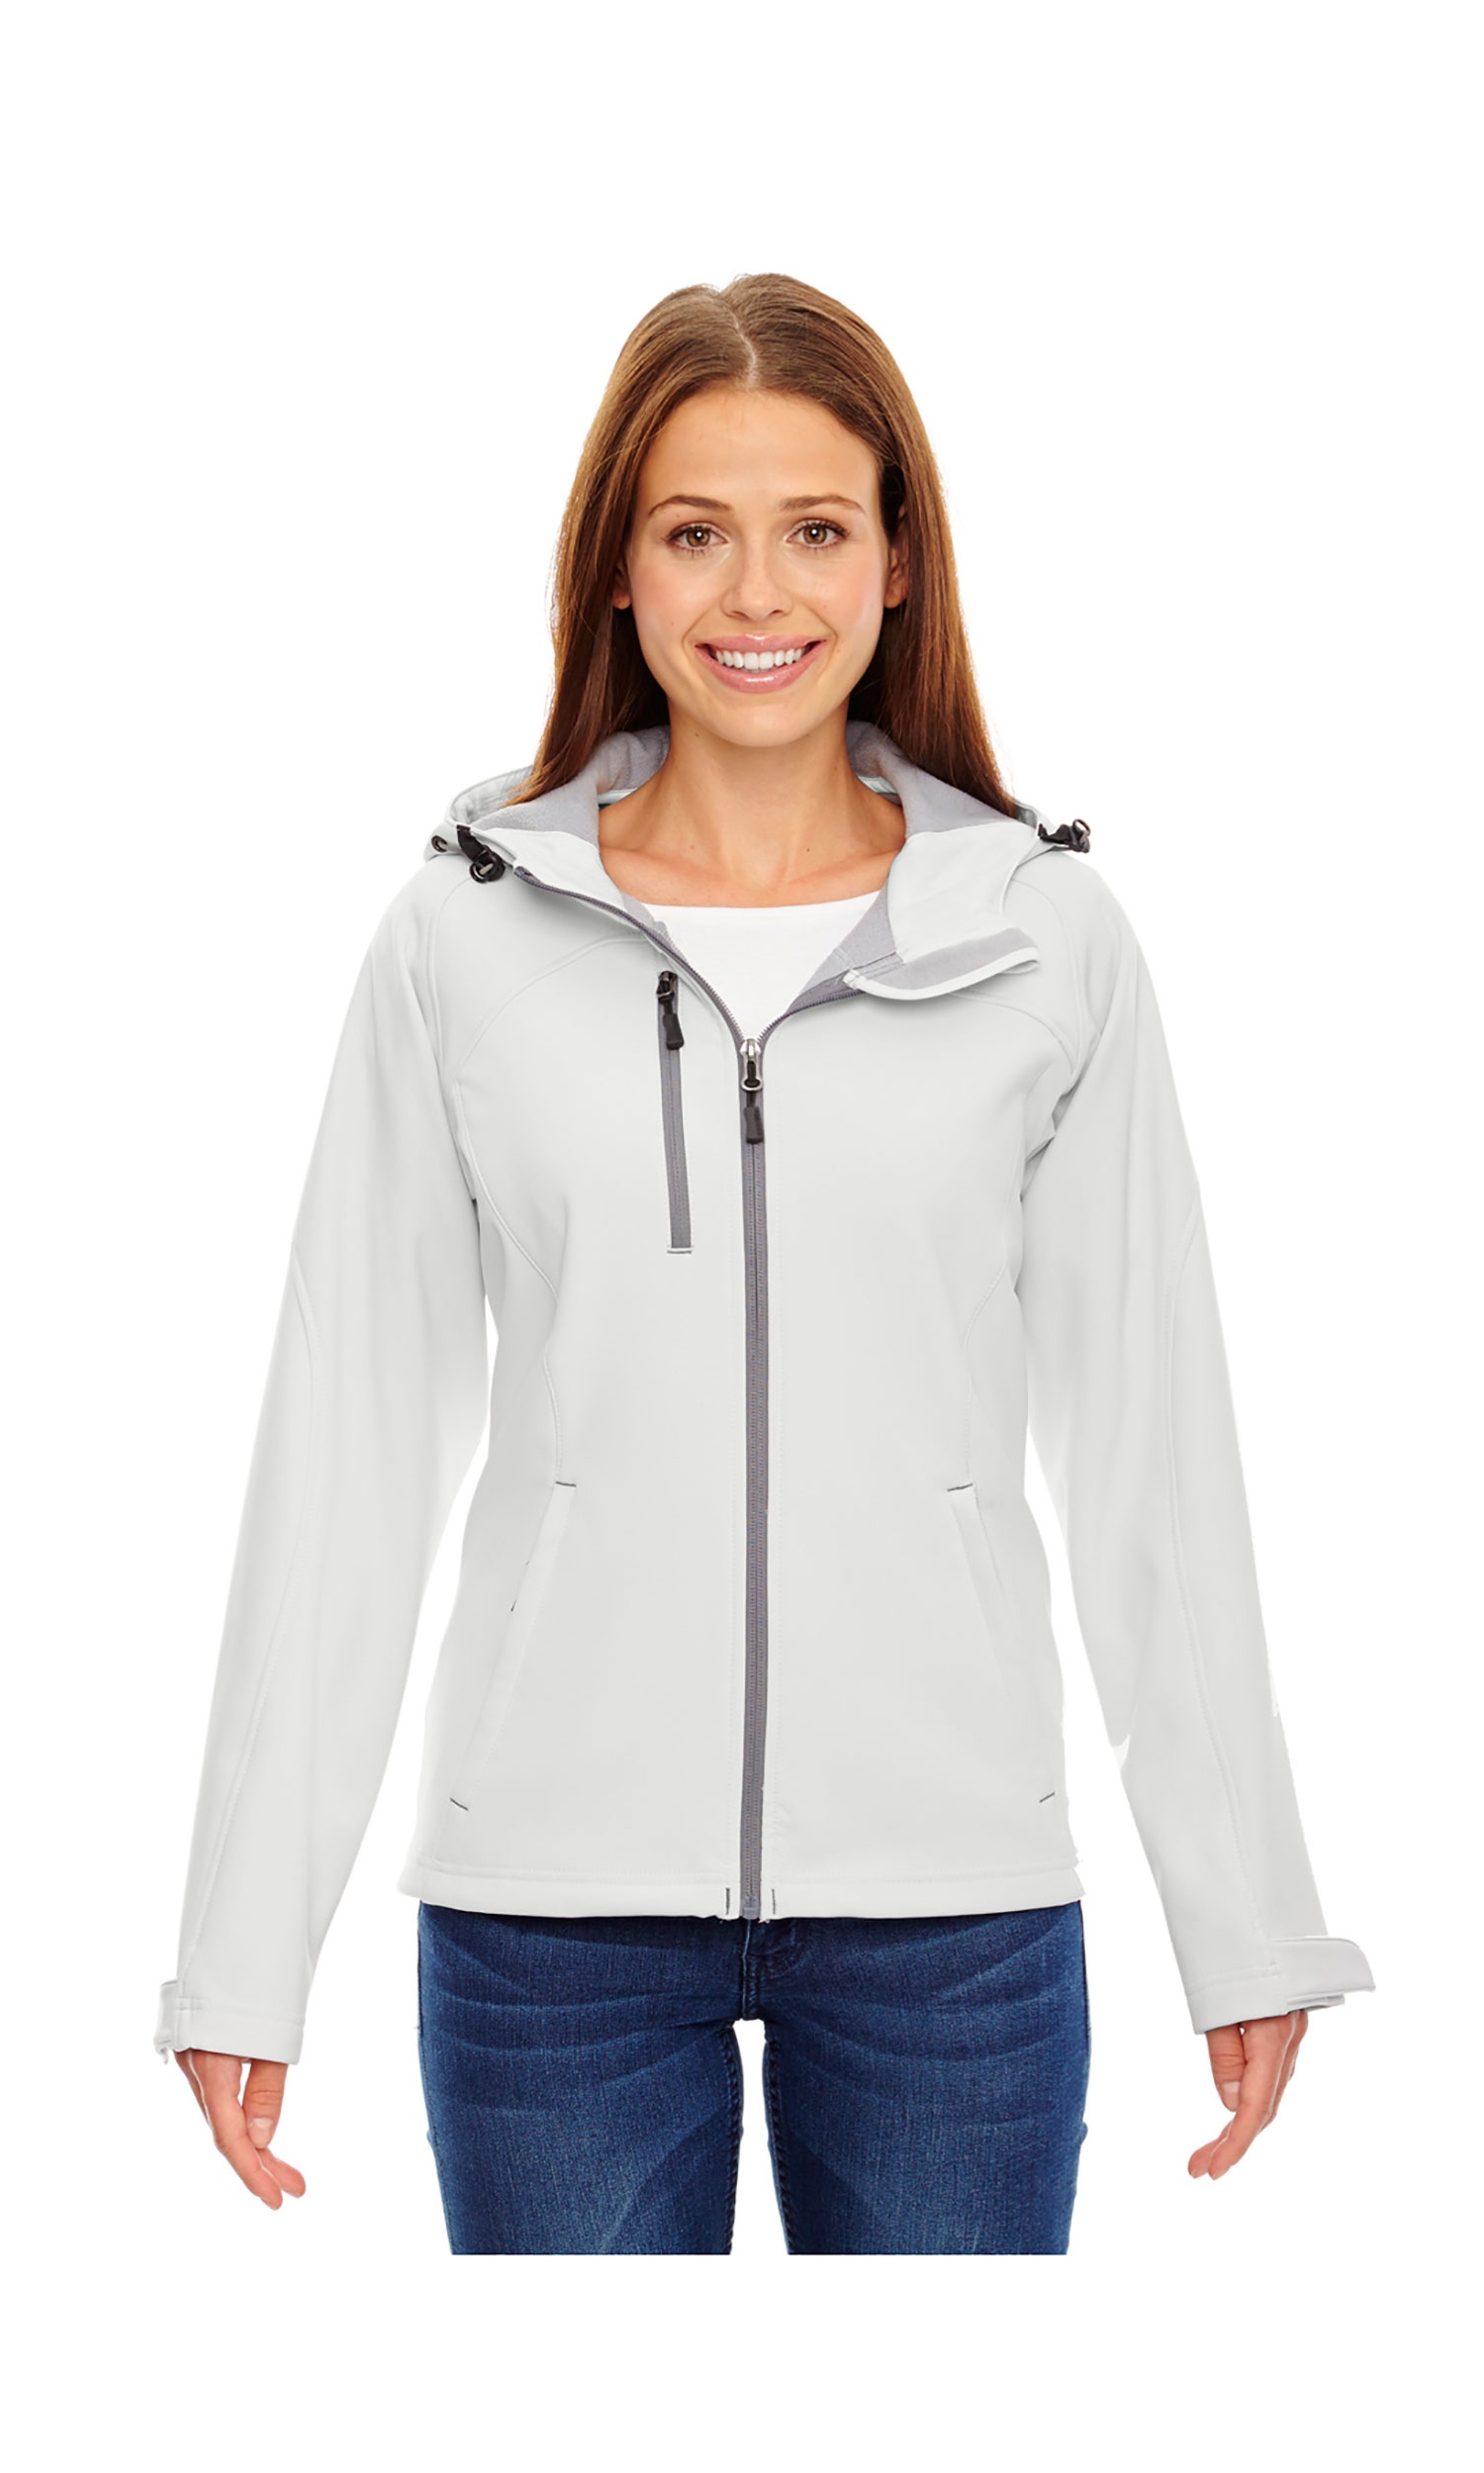 North End Prospect Ladies Soft Shell Jacket With Hood, Style 78166 - image 1 of 1